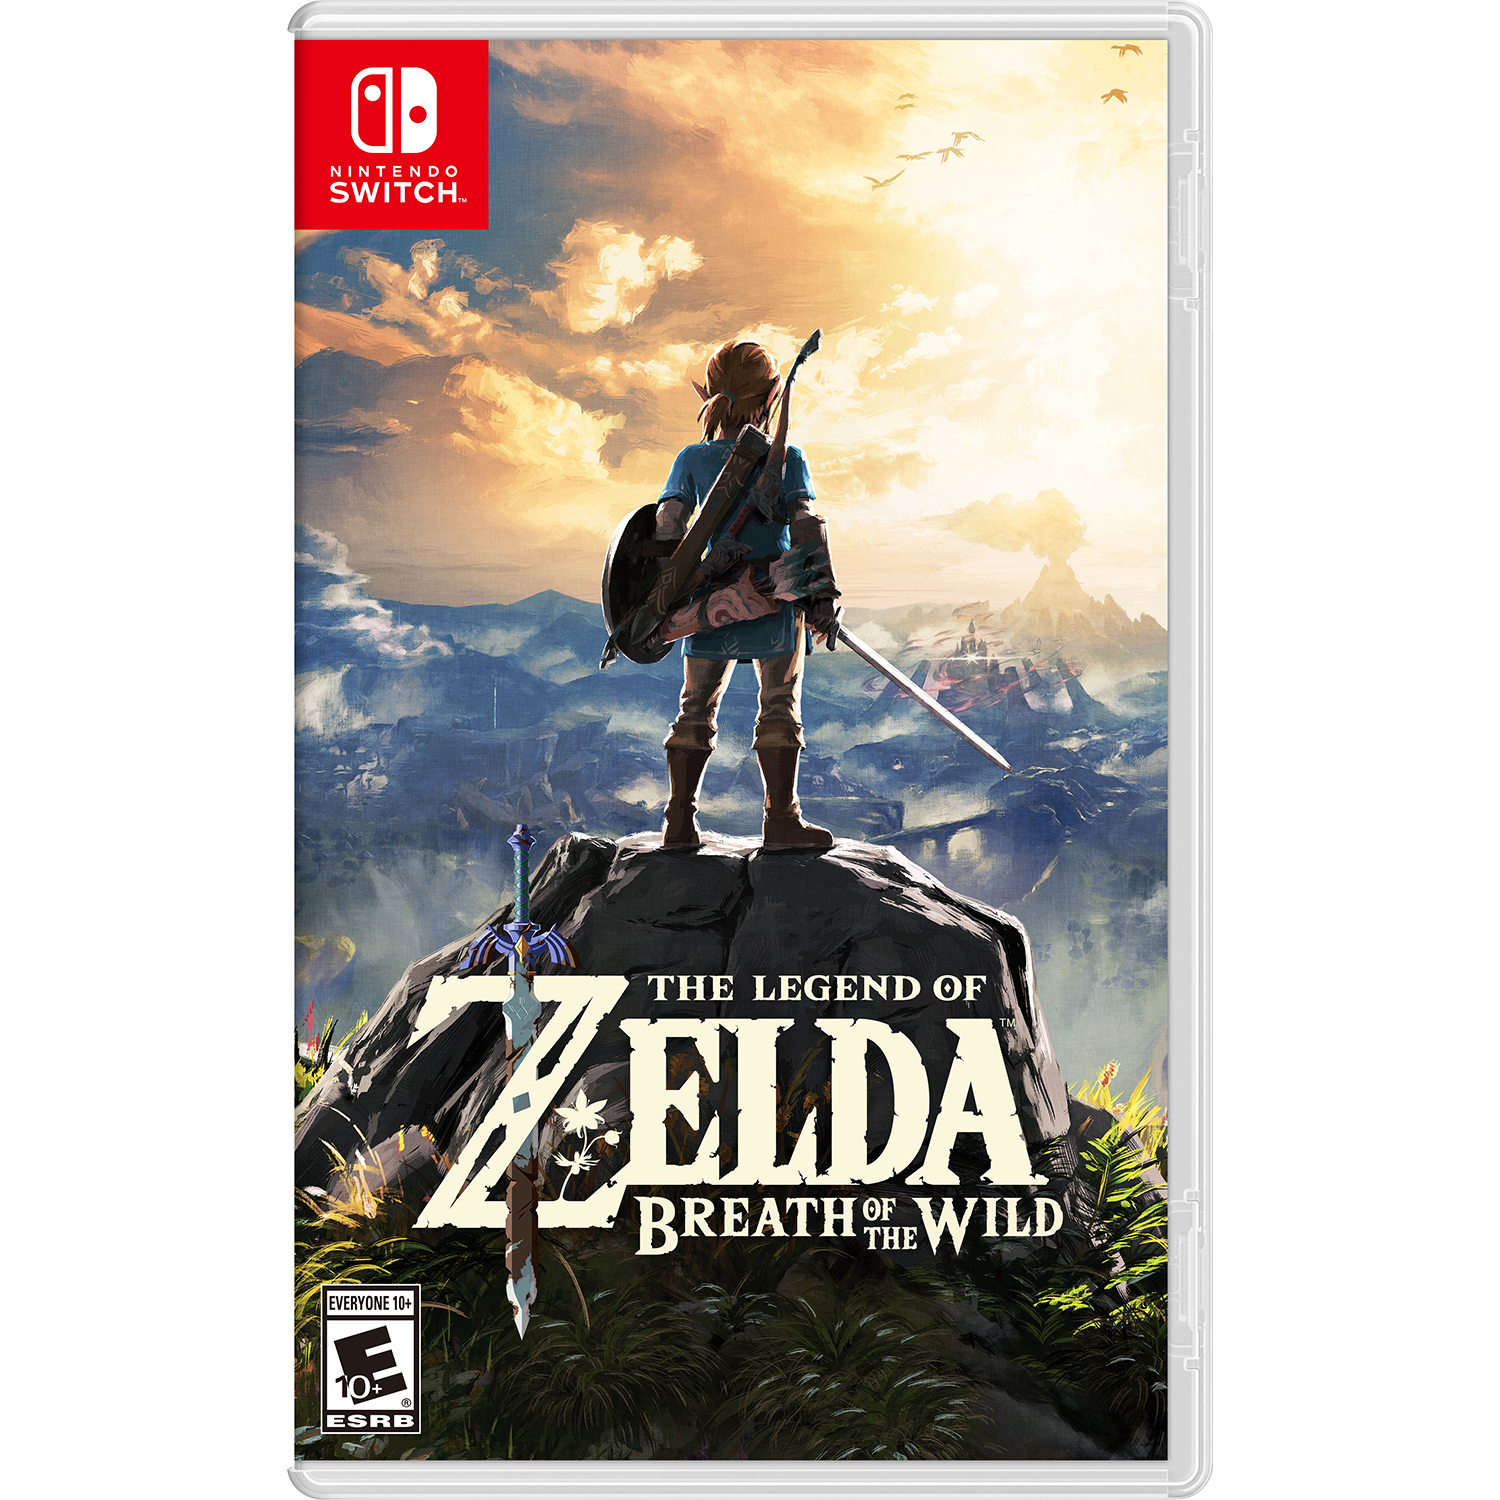 The Legend of Zelda: Breath of the Wild, Nintendo, Nintendo Switch, REFURBISHED/PREOWNED - image 1 of 1